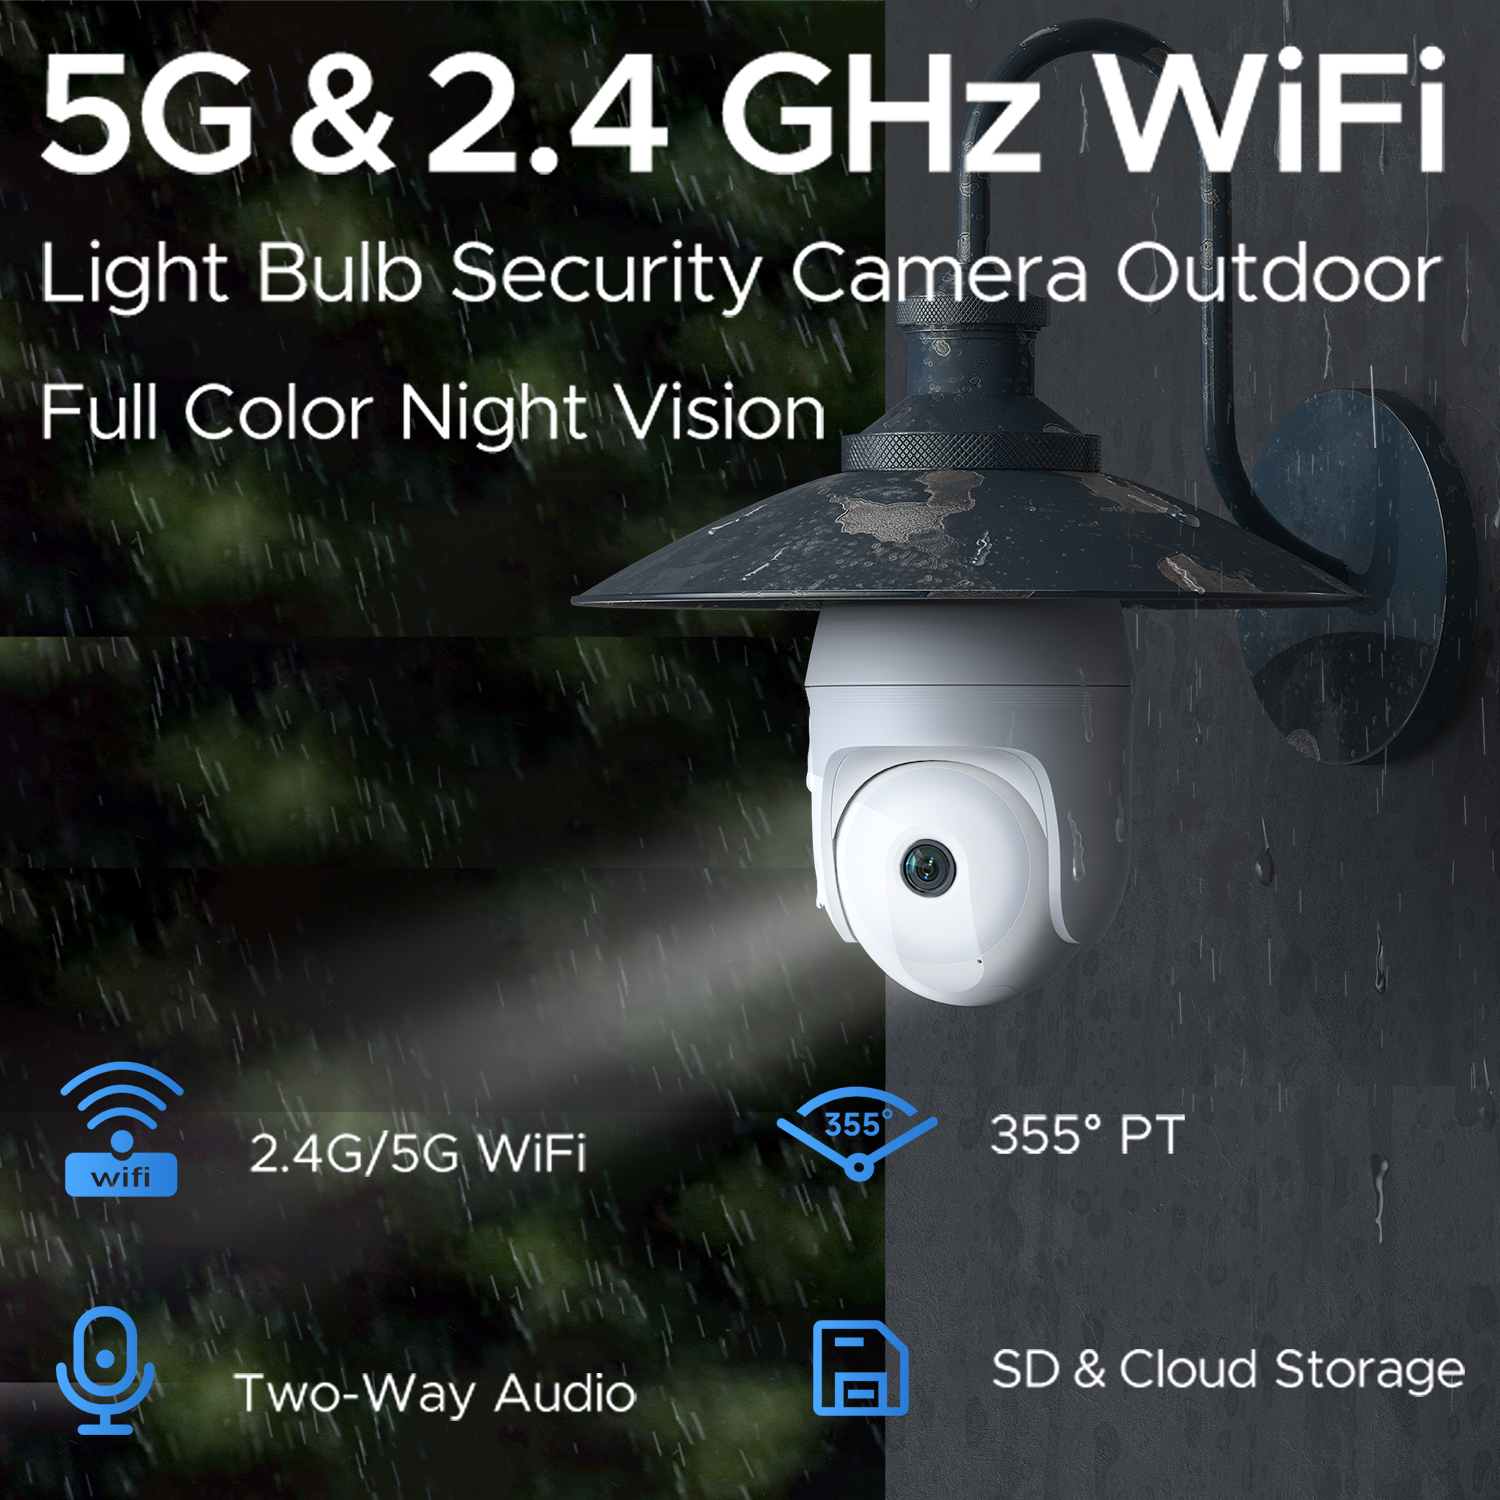 Toguard SC11 10X Hybrid Zoom Light Bulb Security Camera Outdoor E27 PTZ Dual Lens Wireless Wi-Fi Dome Surveillance Camera (Supports Only 2.4GHz Wi-Fi) - image 3 of 9